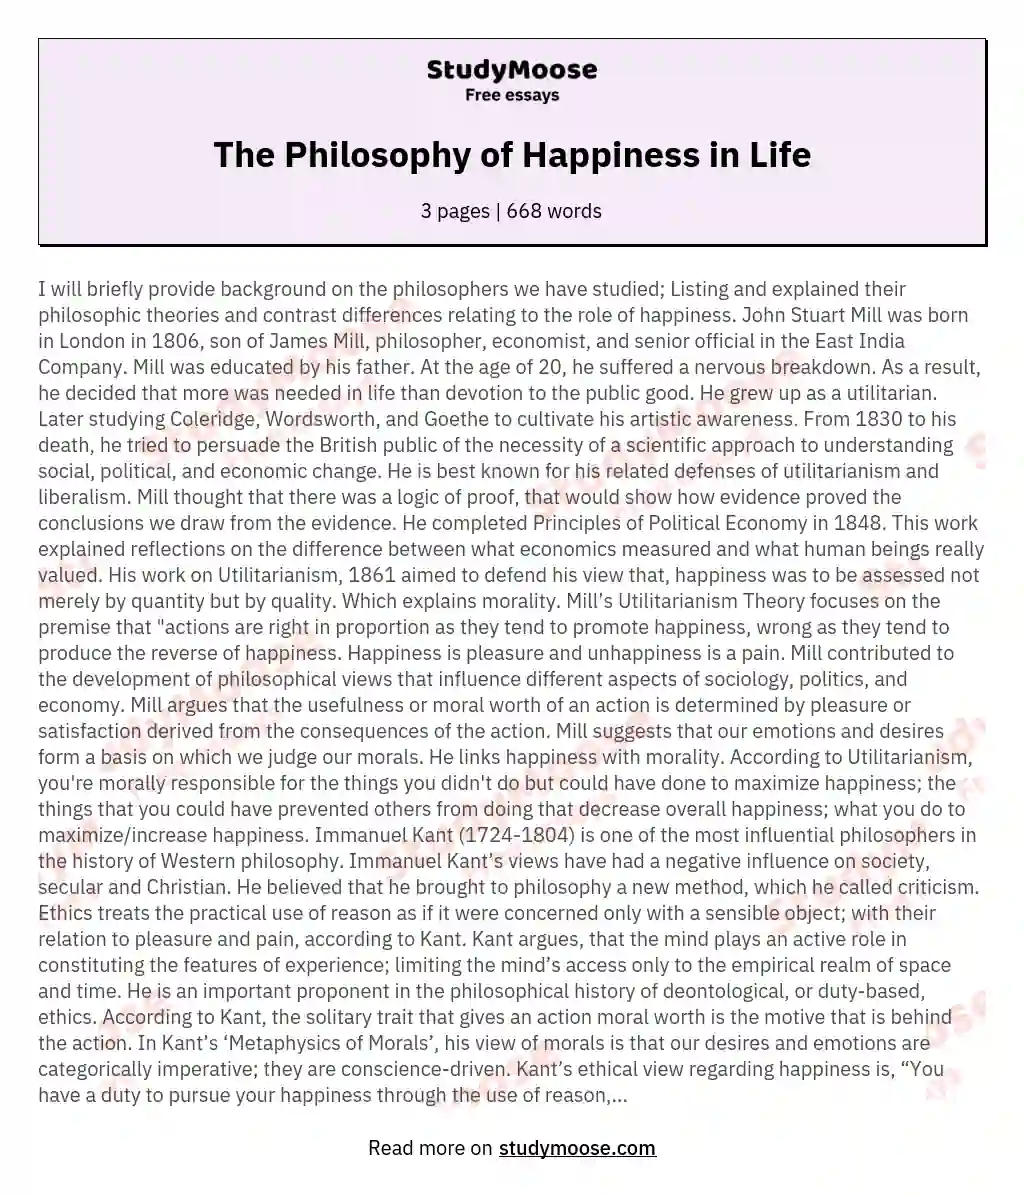 The Philosophy of Happiness in Life essay